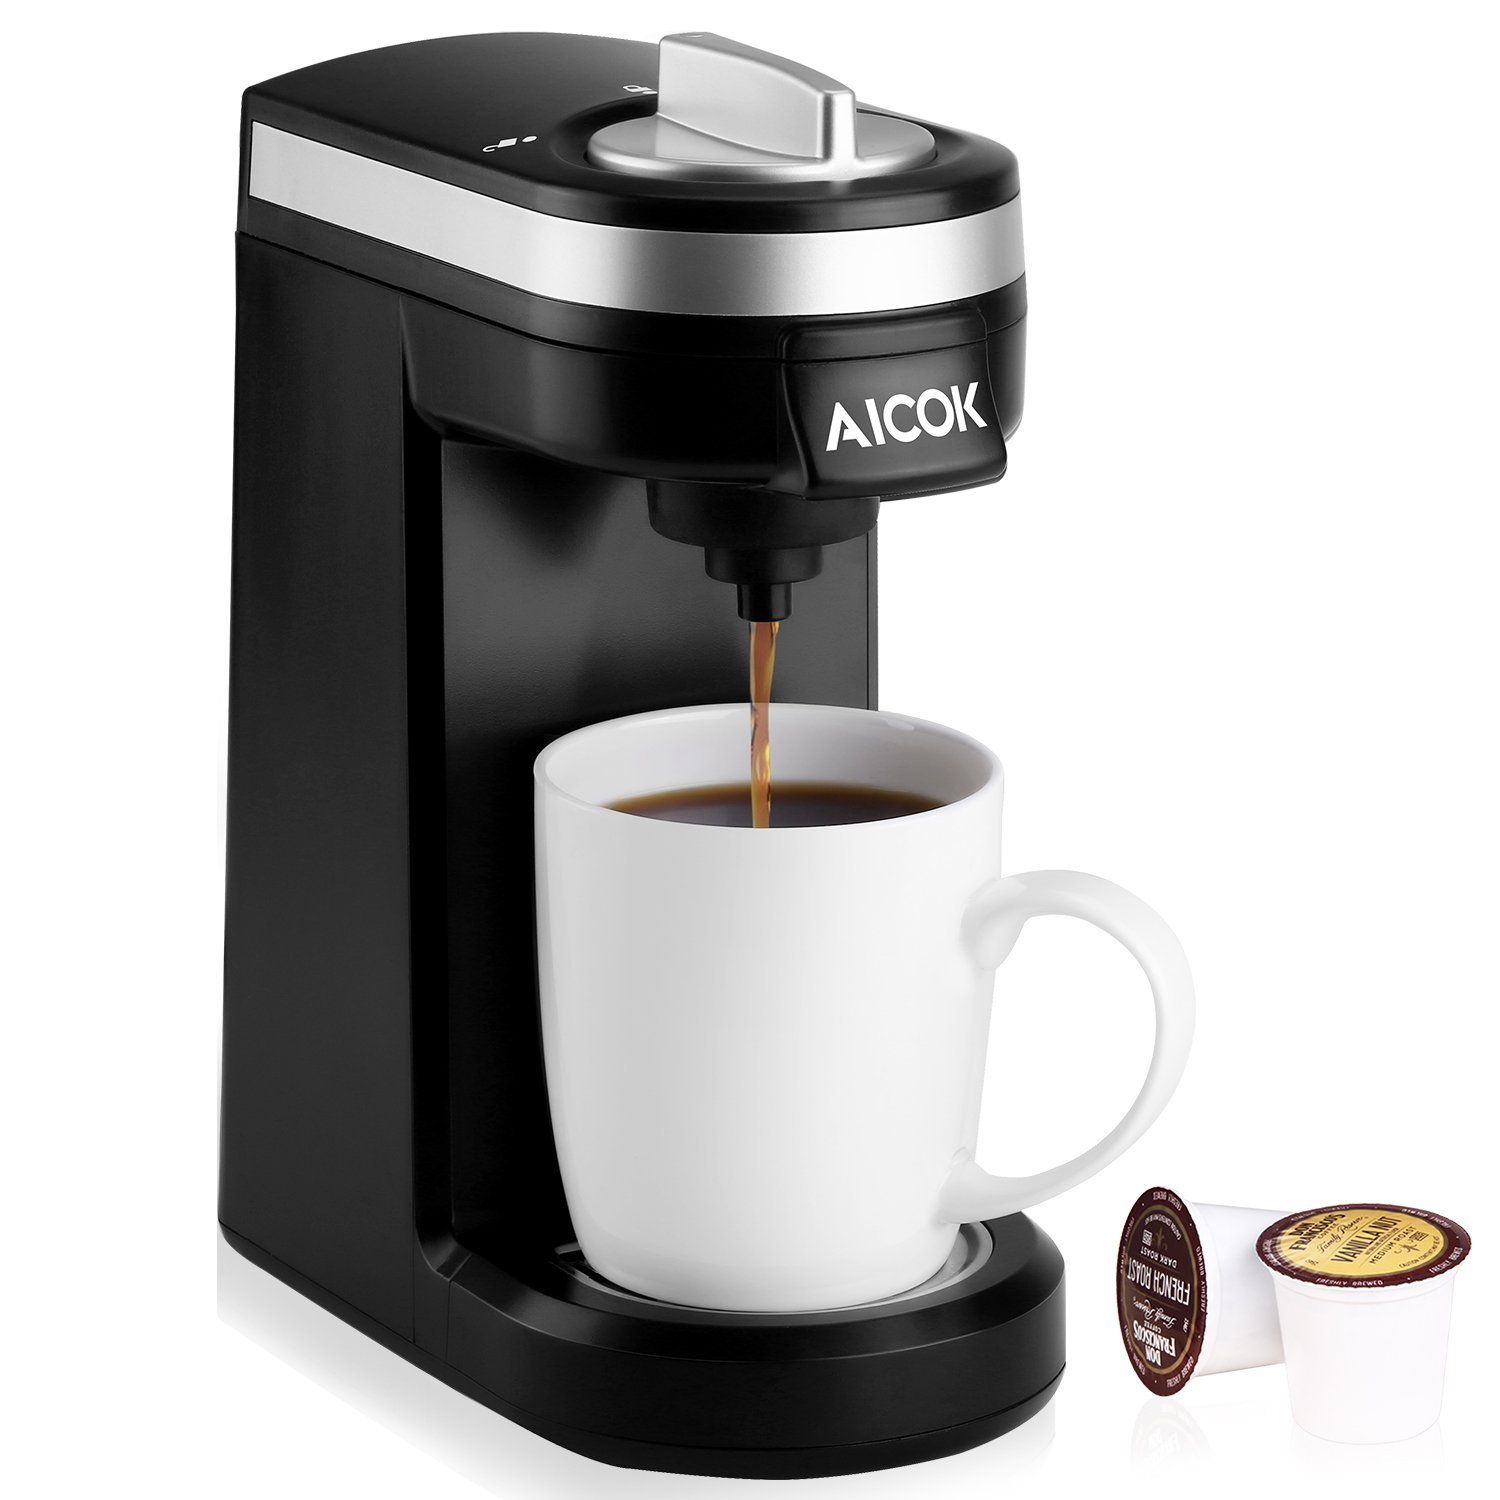 Aicok single serve K-Cup coffee maker for $25